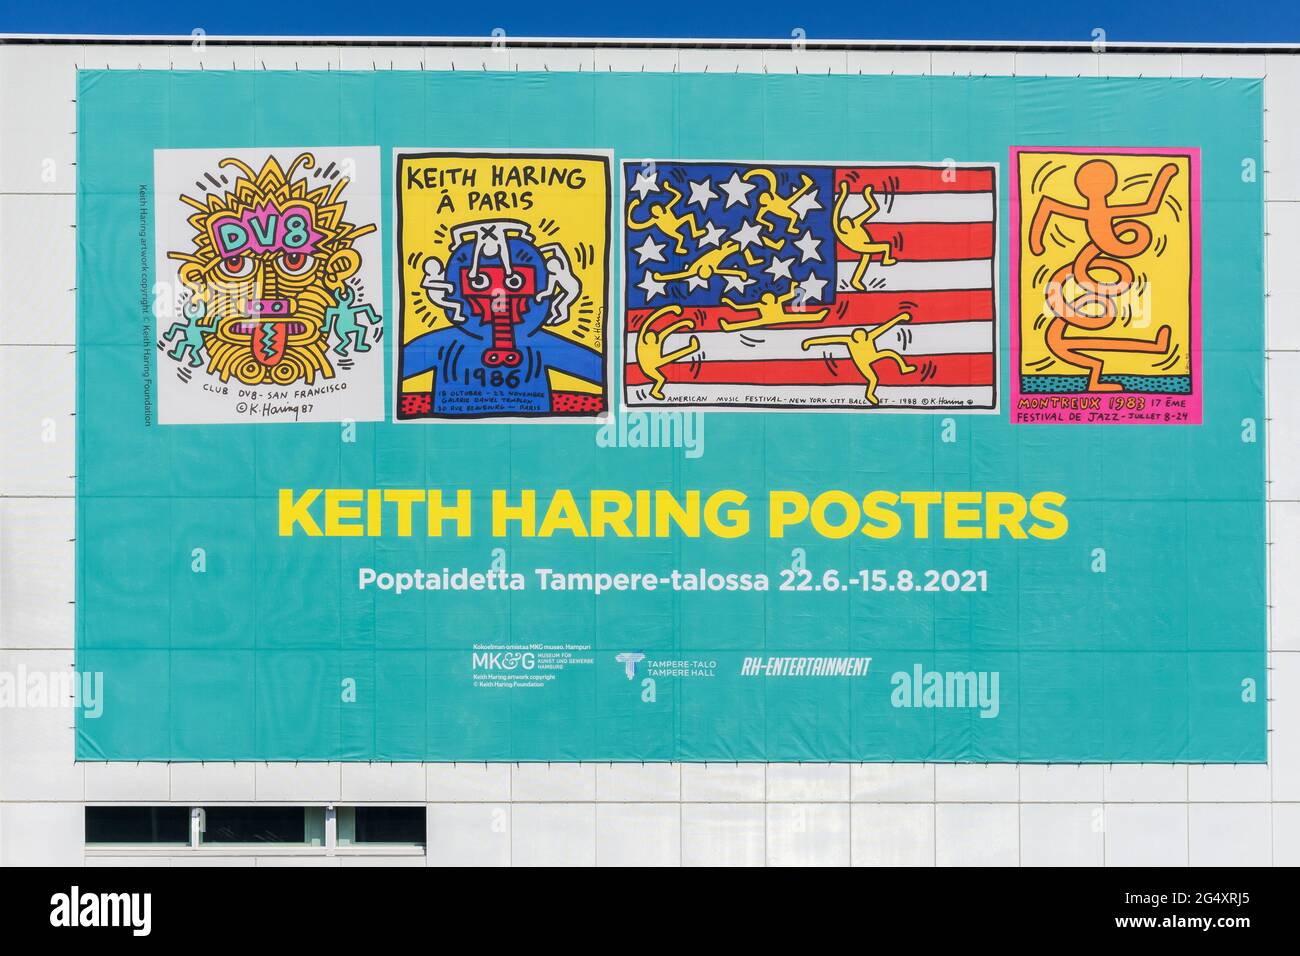 Keith Haring poster exhibition in Tampere Hall in Tampere Finland